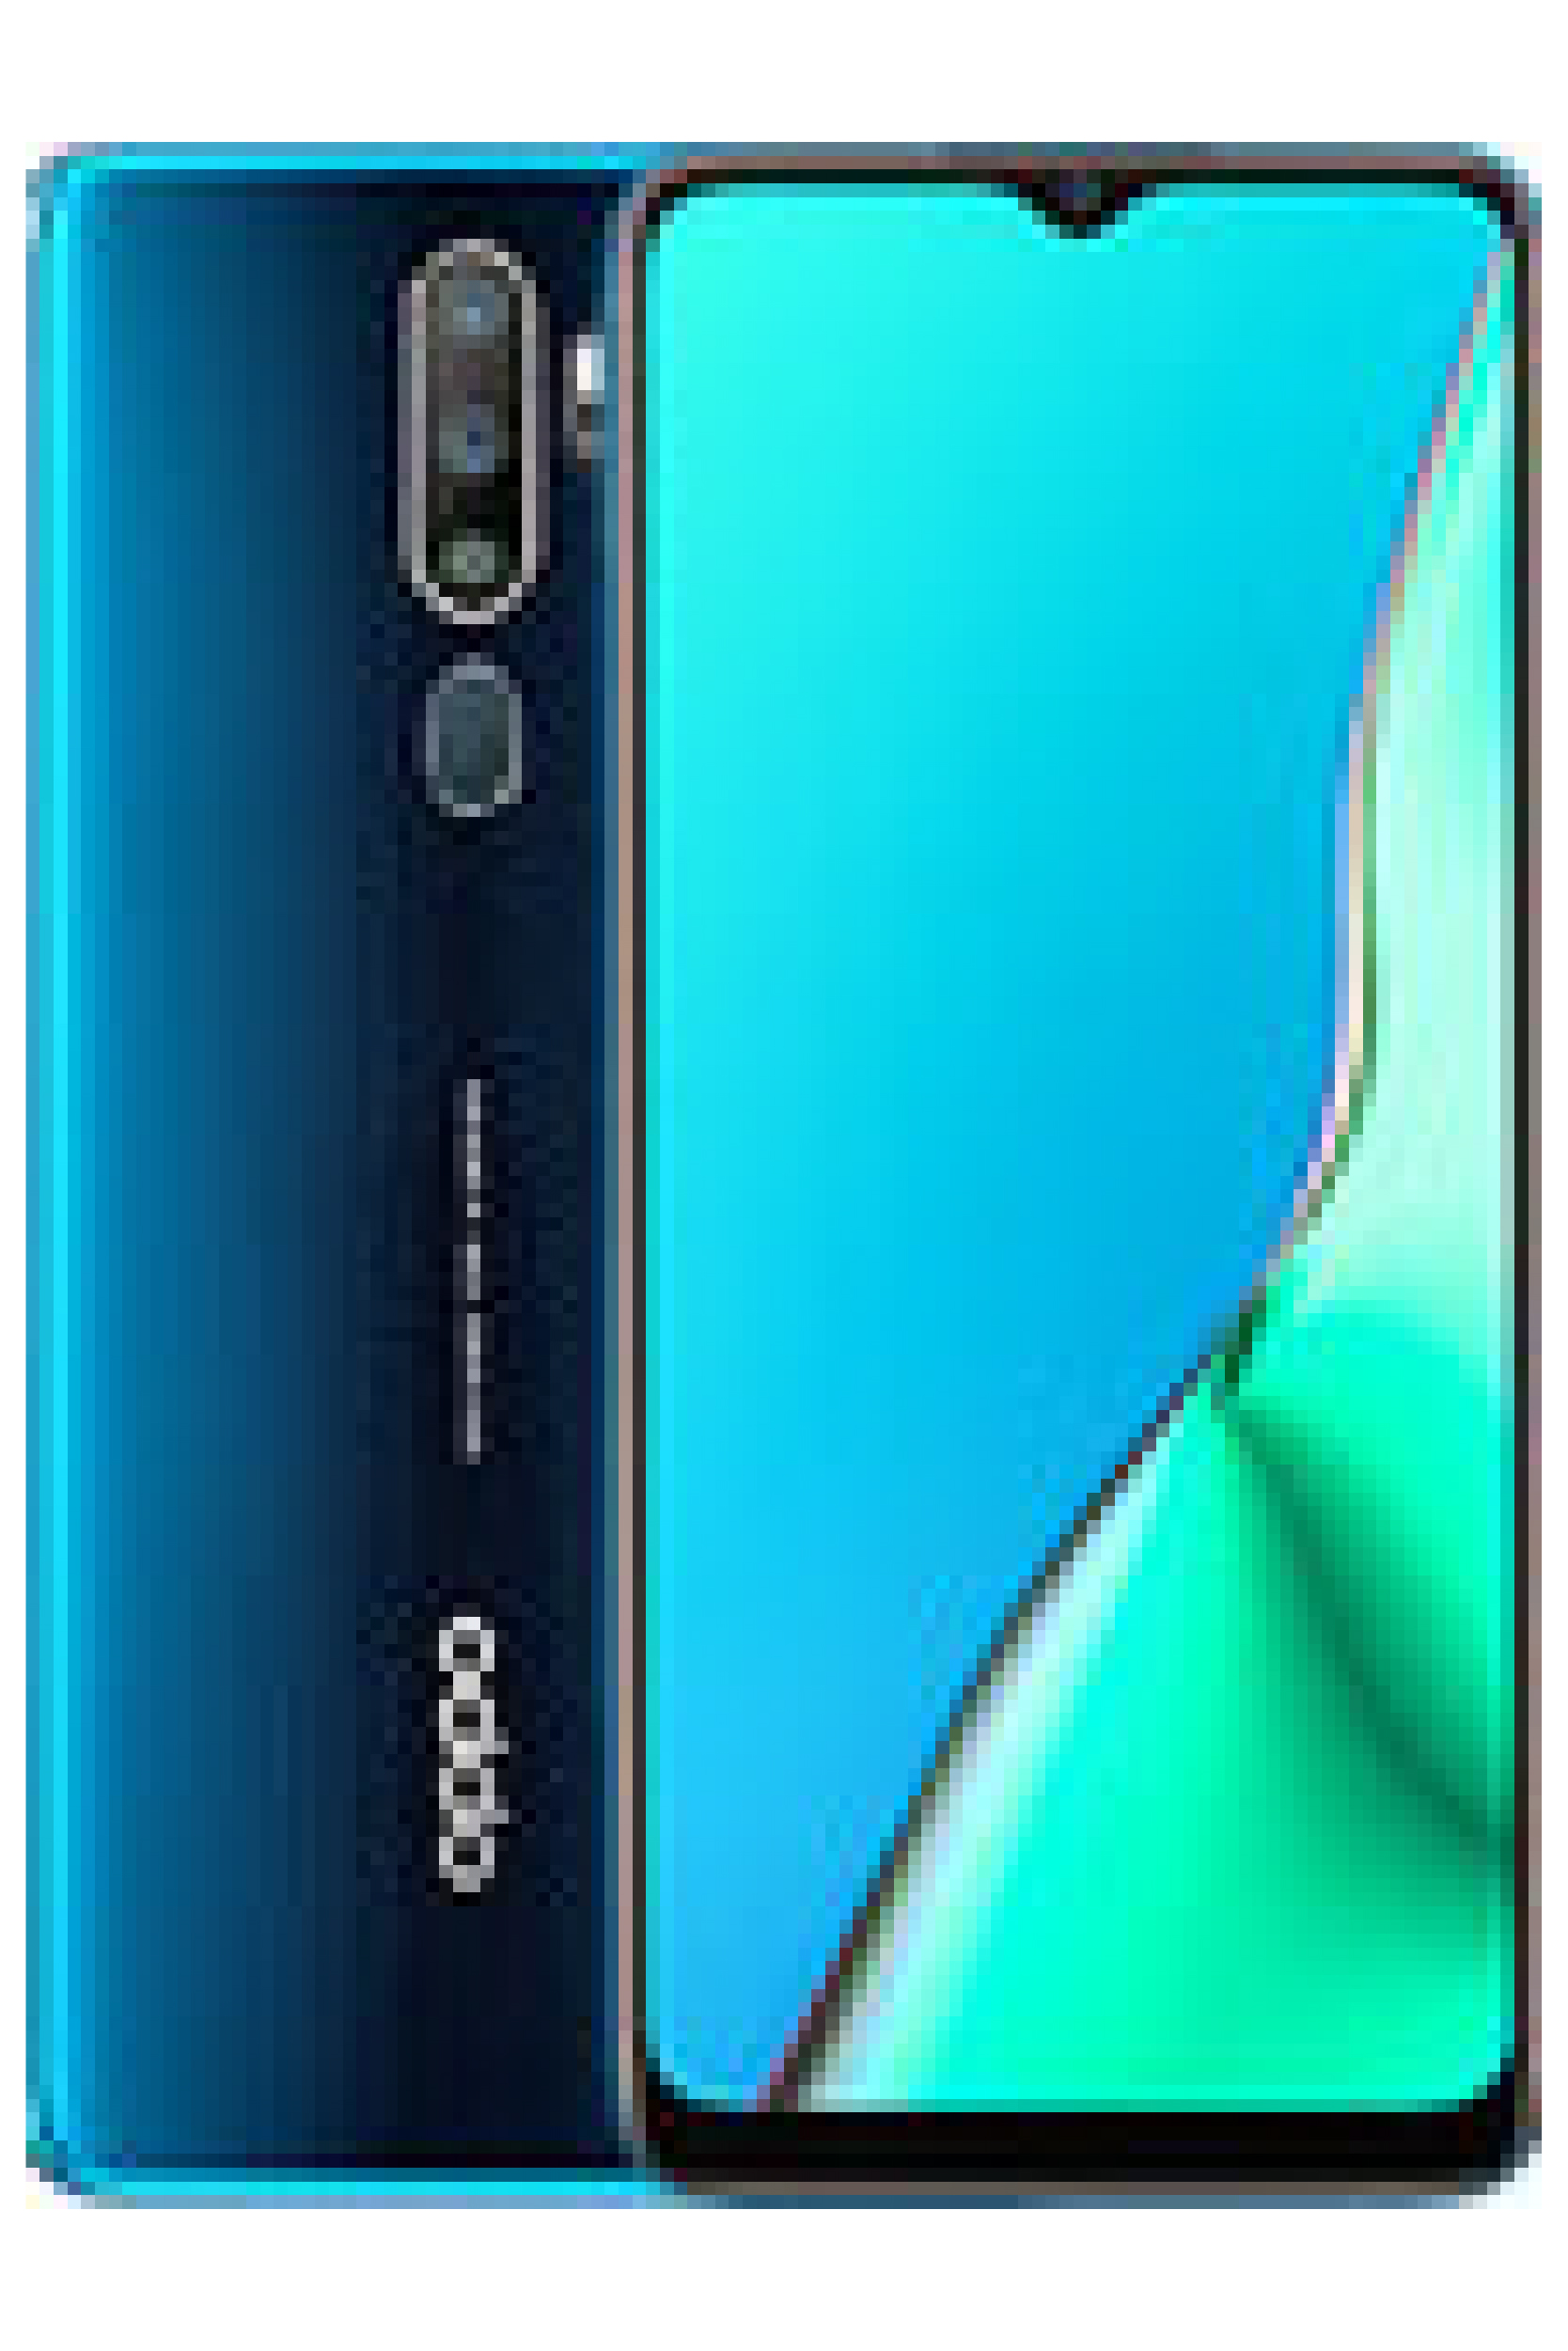 Oppo A9 2020 Specs - Oppo A9 2020 Price in India, Full Specs - 6th